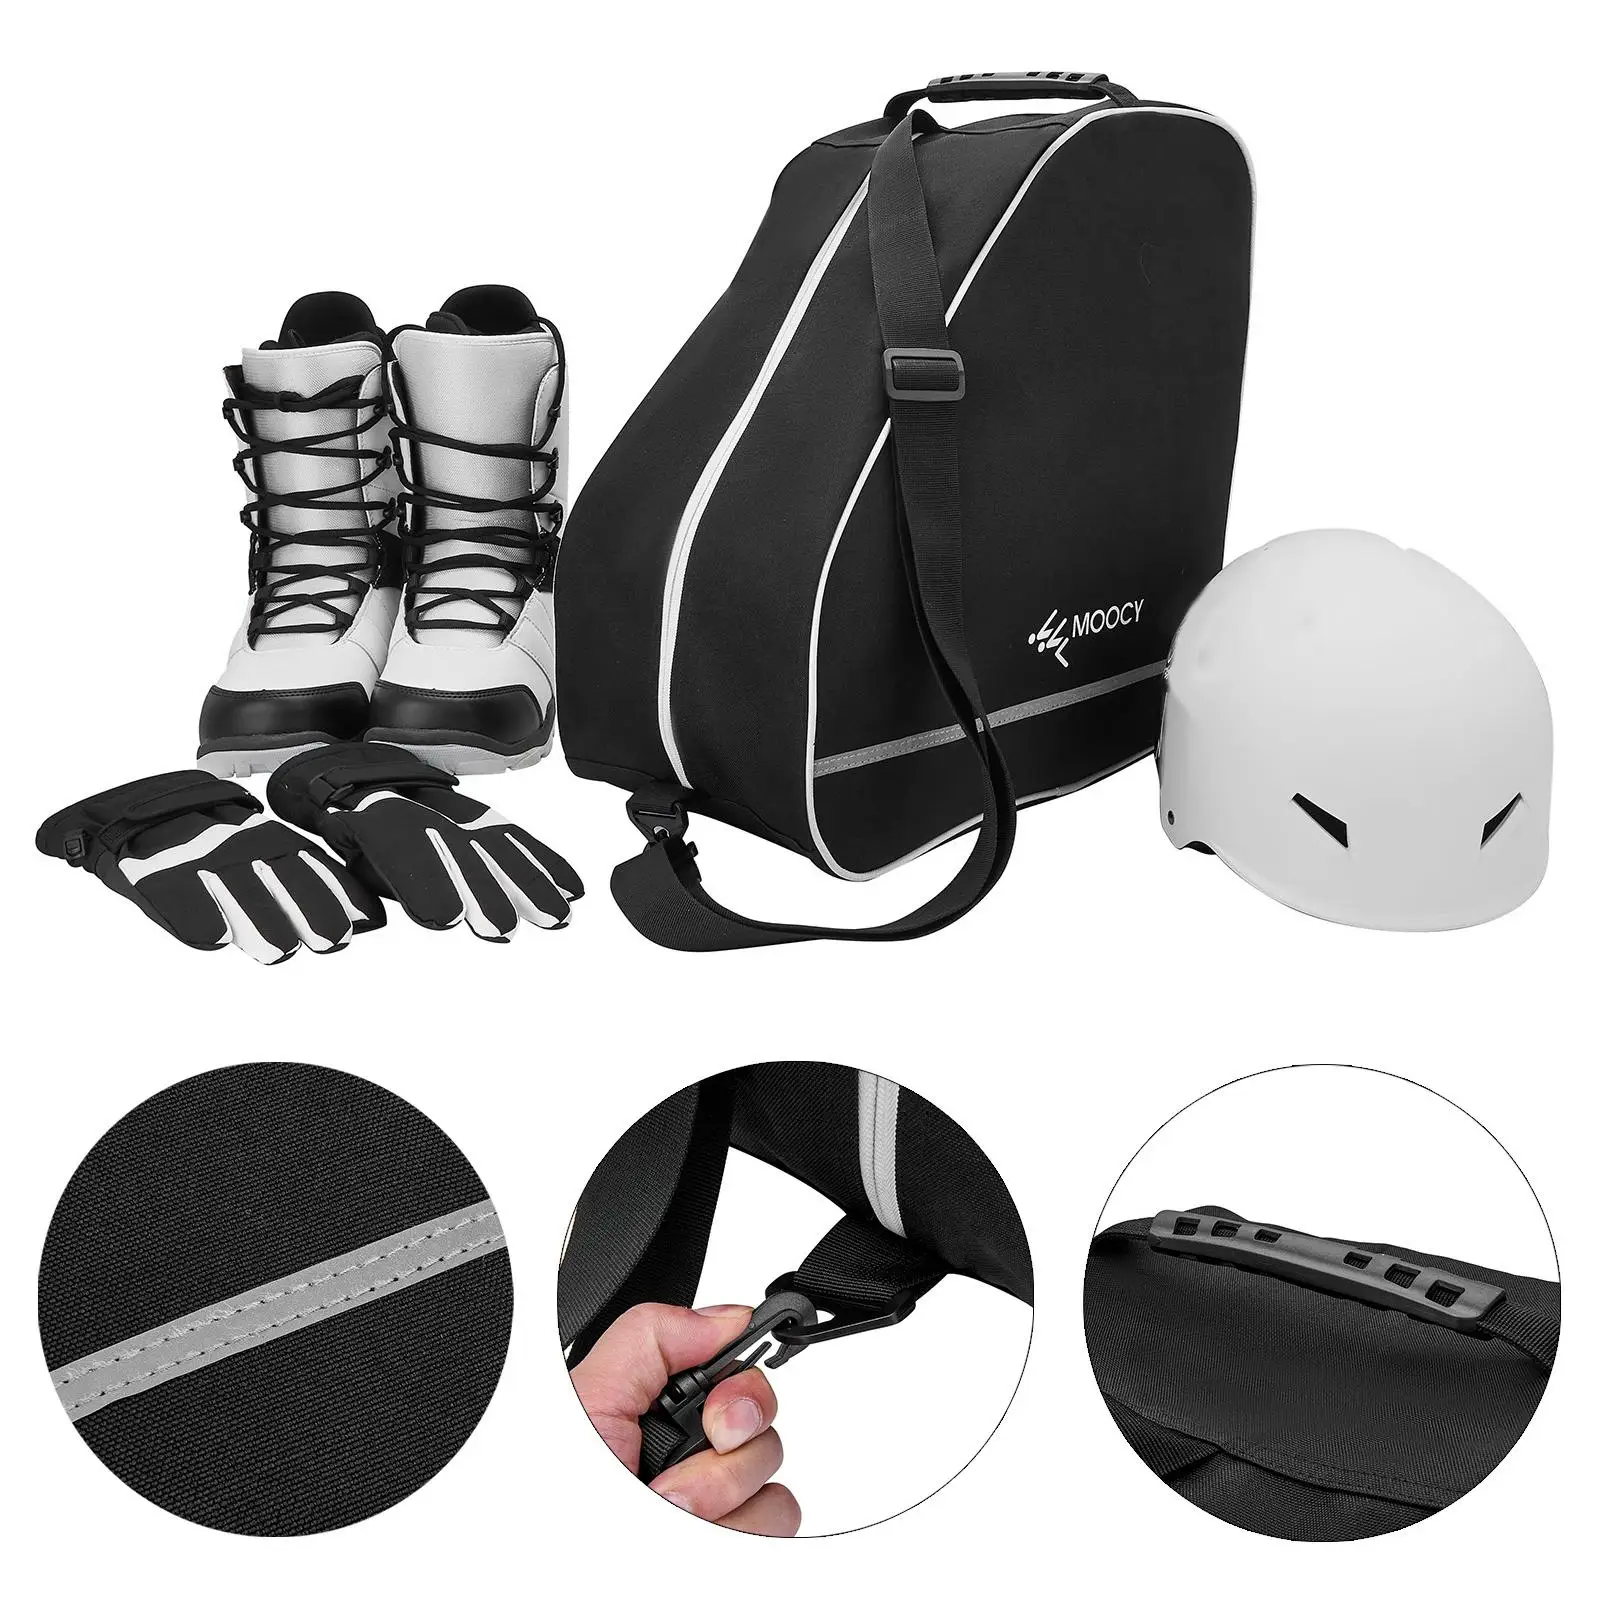 Skiing Boot Bag Travel Easy to Carry for Riding Gloves Outdoor Activities Winter Sports